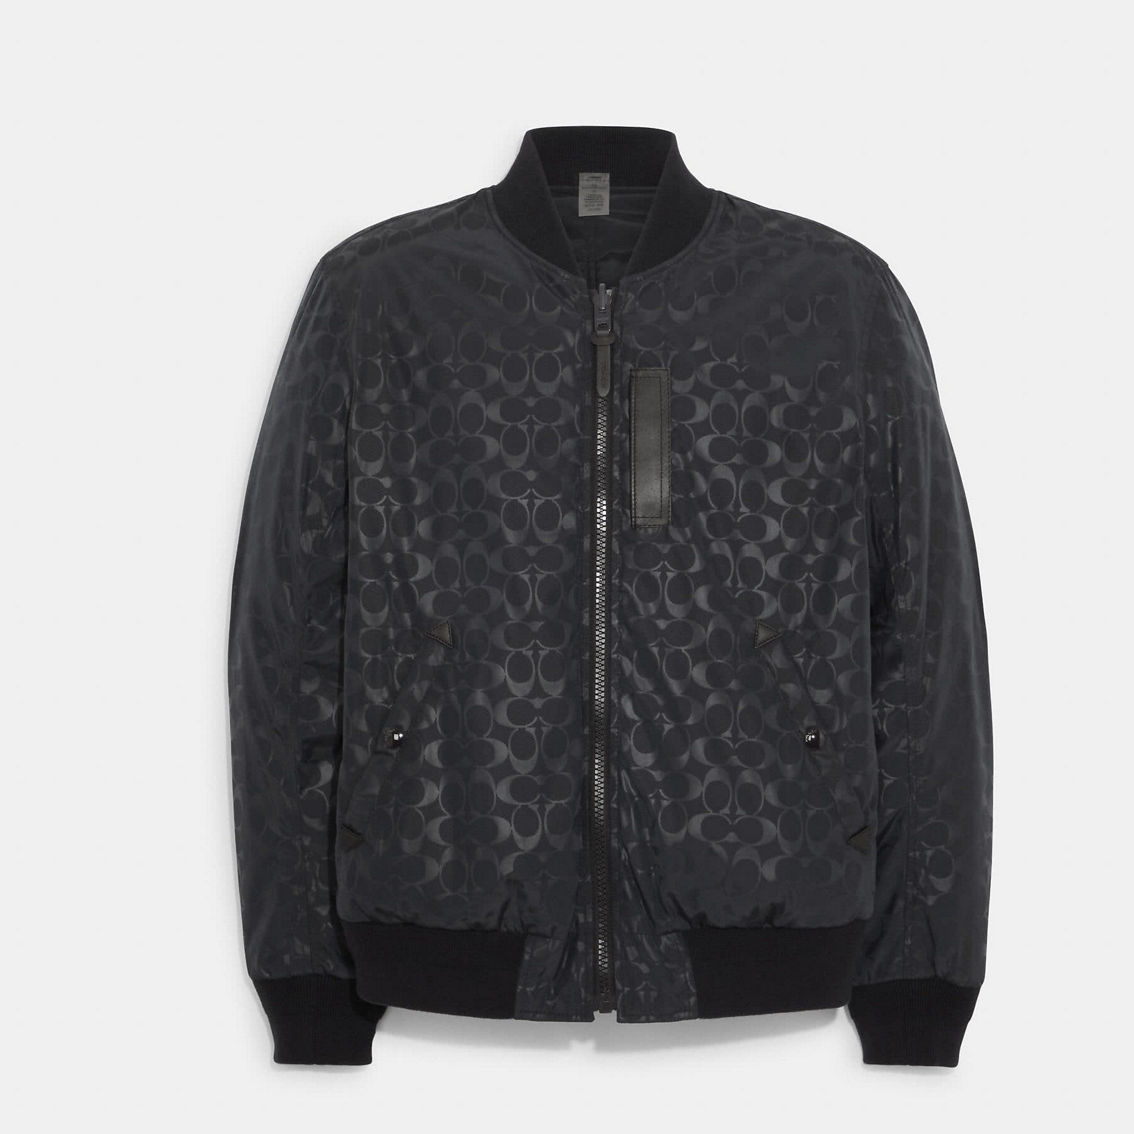 Coach Outlet Reversible Signature Ma 1 Jacket - Image 5 of 5